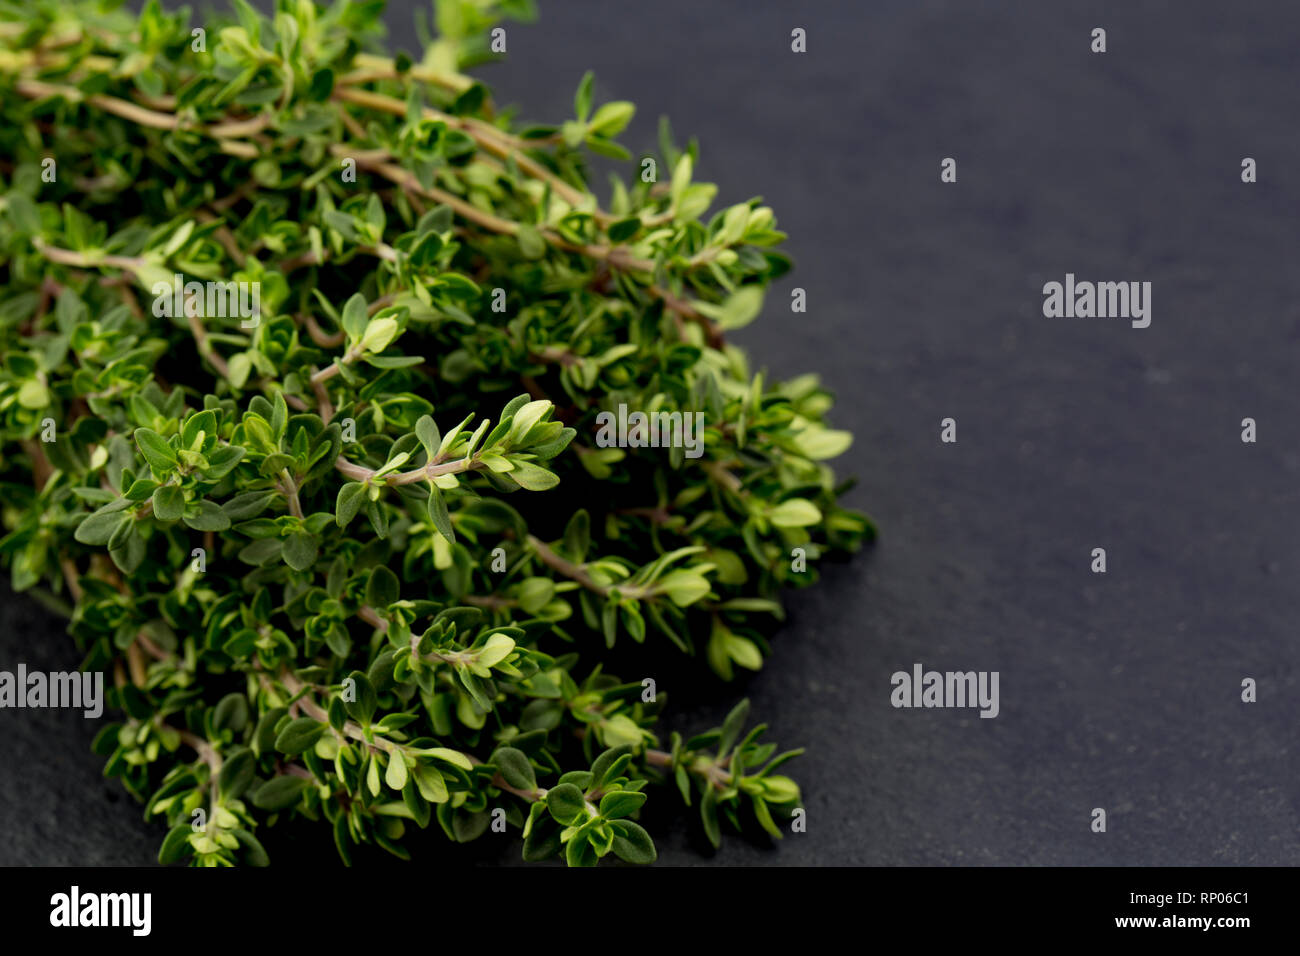 A bunch of fresh lemon thyme imported from Morocco and bought in a supermarket in the UK. Photographed on a dark, slate background. Dorset England UK  Stock Photo